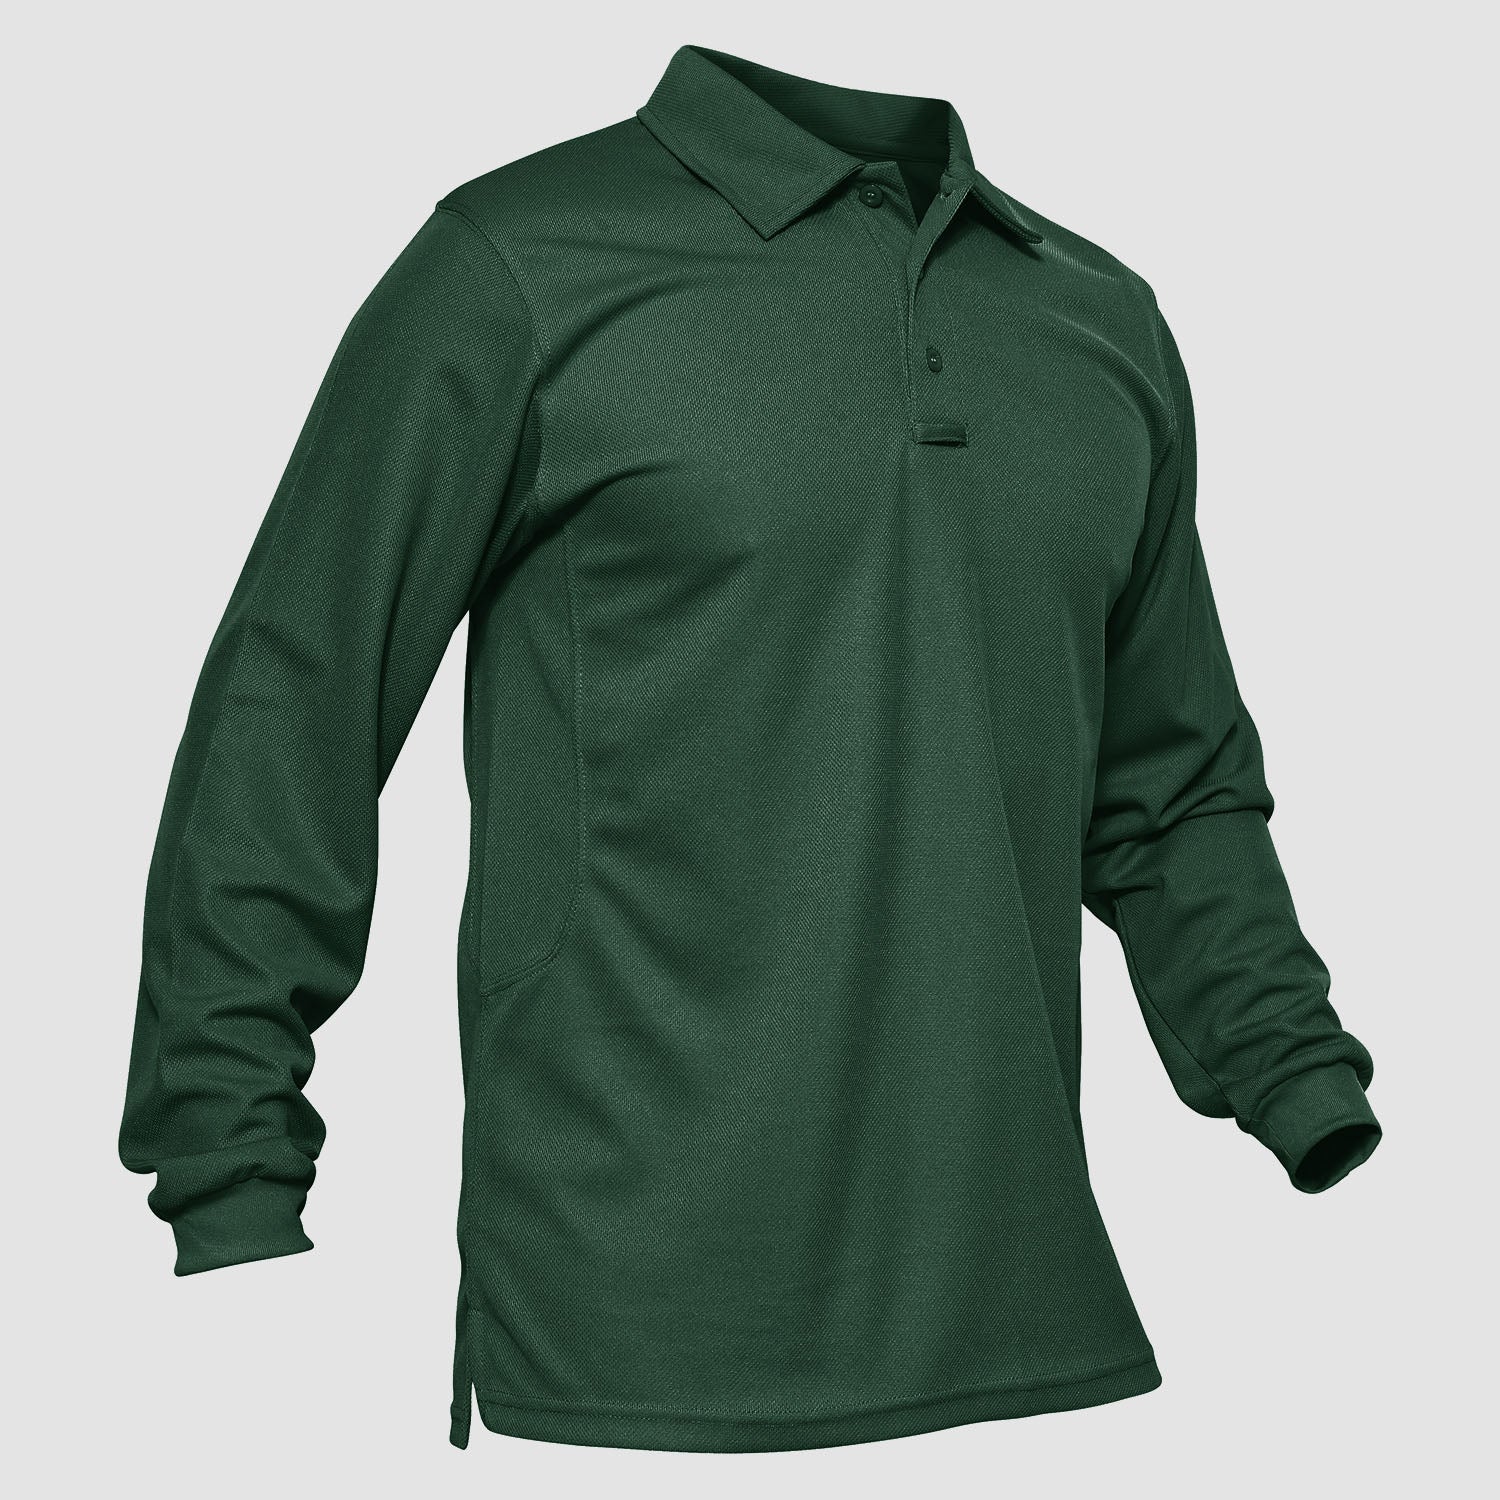 Mens Polo Shirts, Quick Dry Polo Shirts for Men